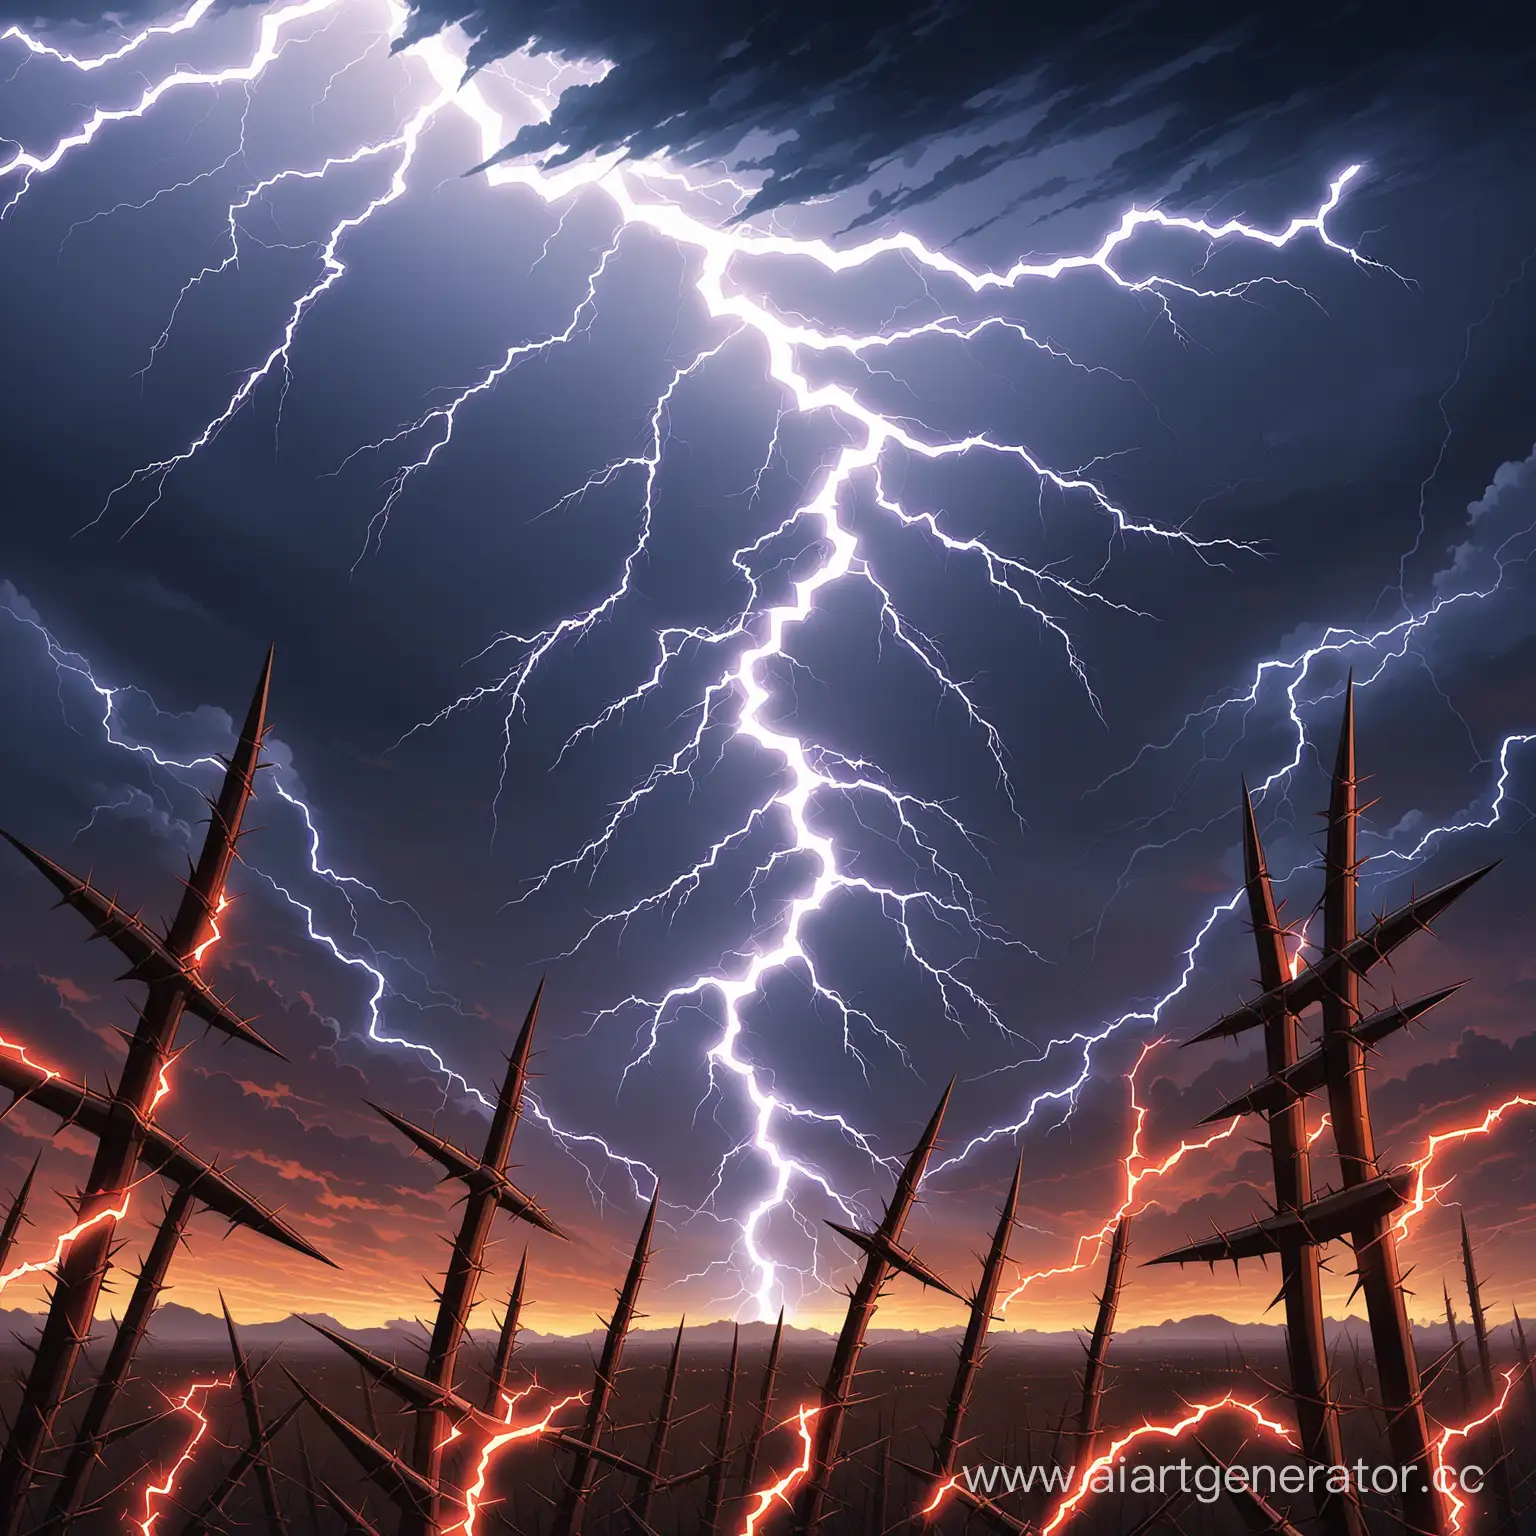 Mysterious-Lightning-Storm-with-Thorny-Tablet-Display